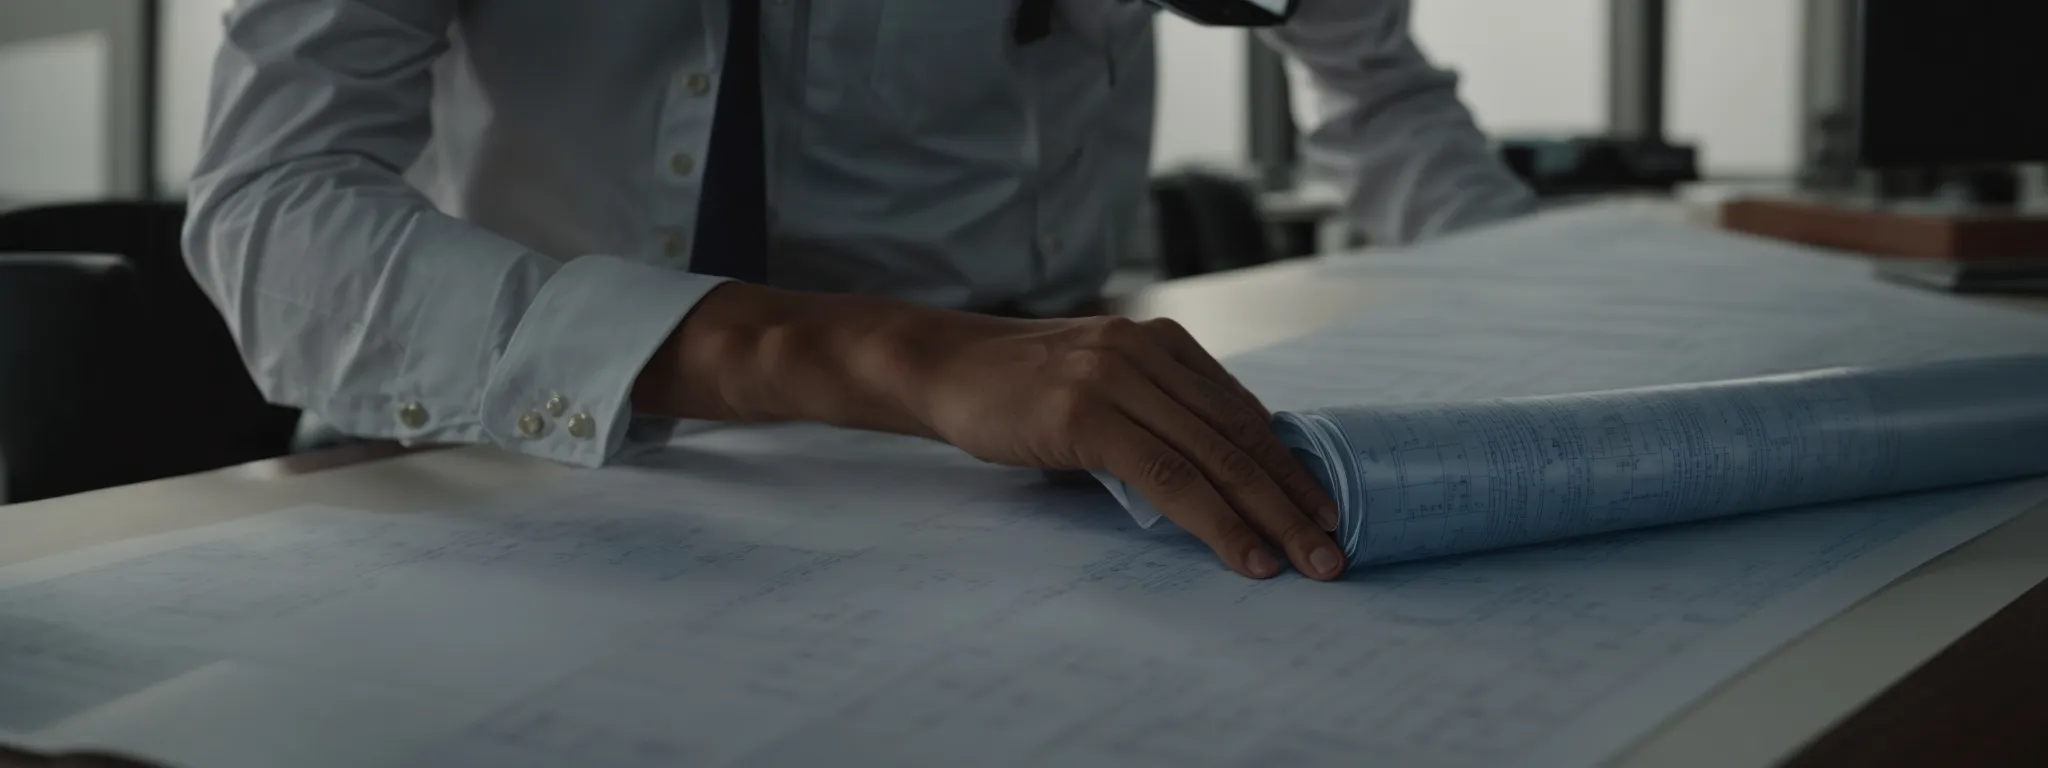 a person unrolls a blueprint on an office desk, highlighting a prominent design at the top.